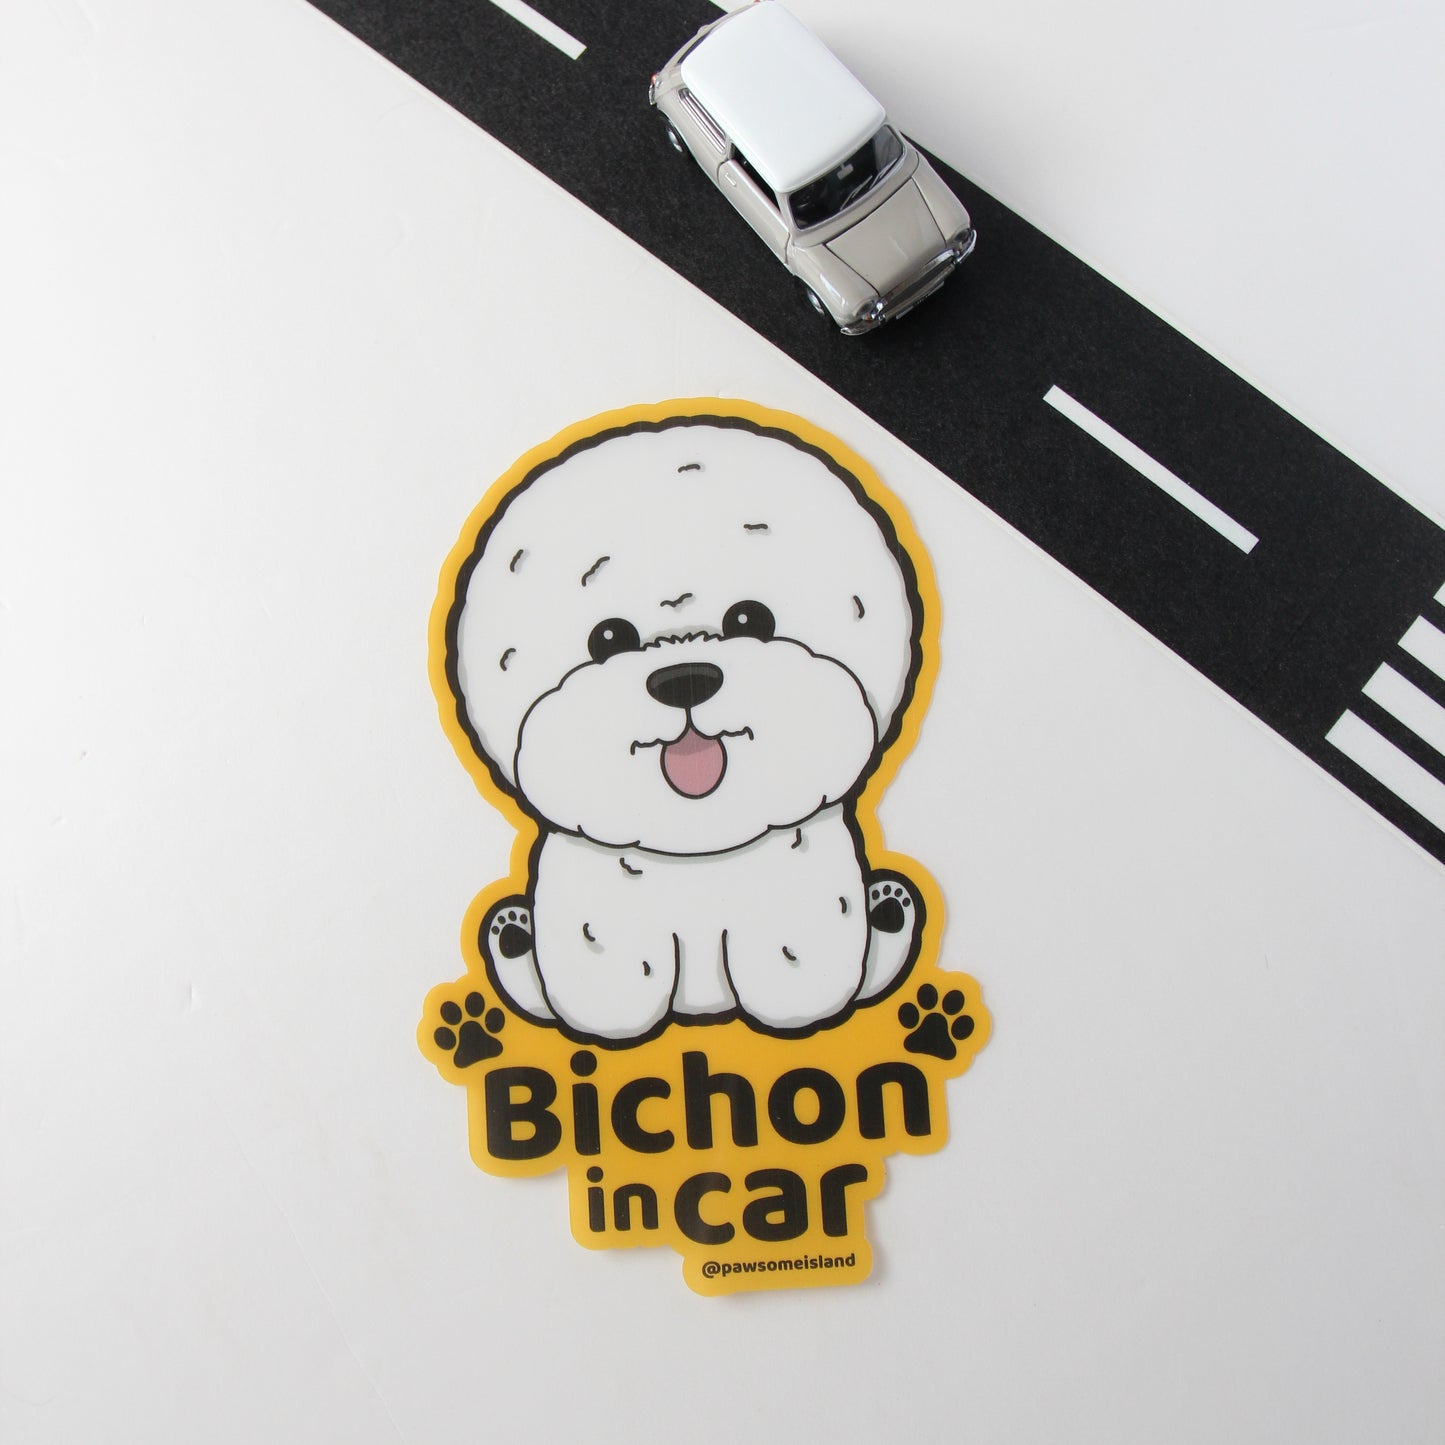 Bichon Car Sticker - A Must-Have for Dog Lovers!